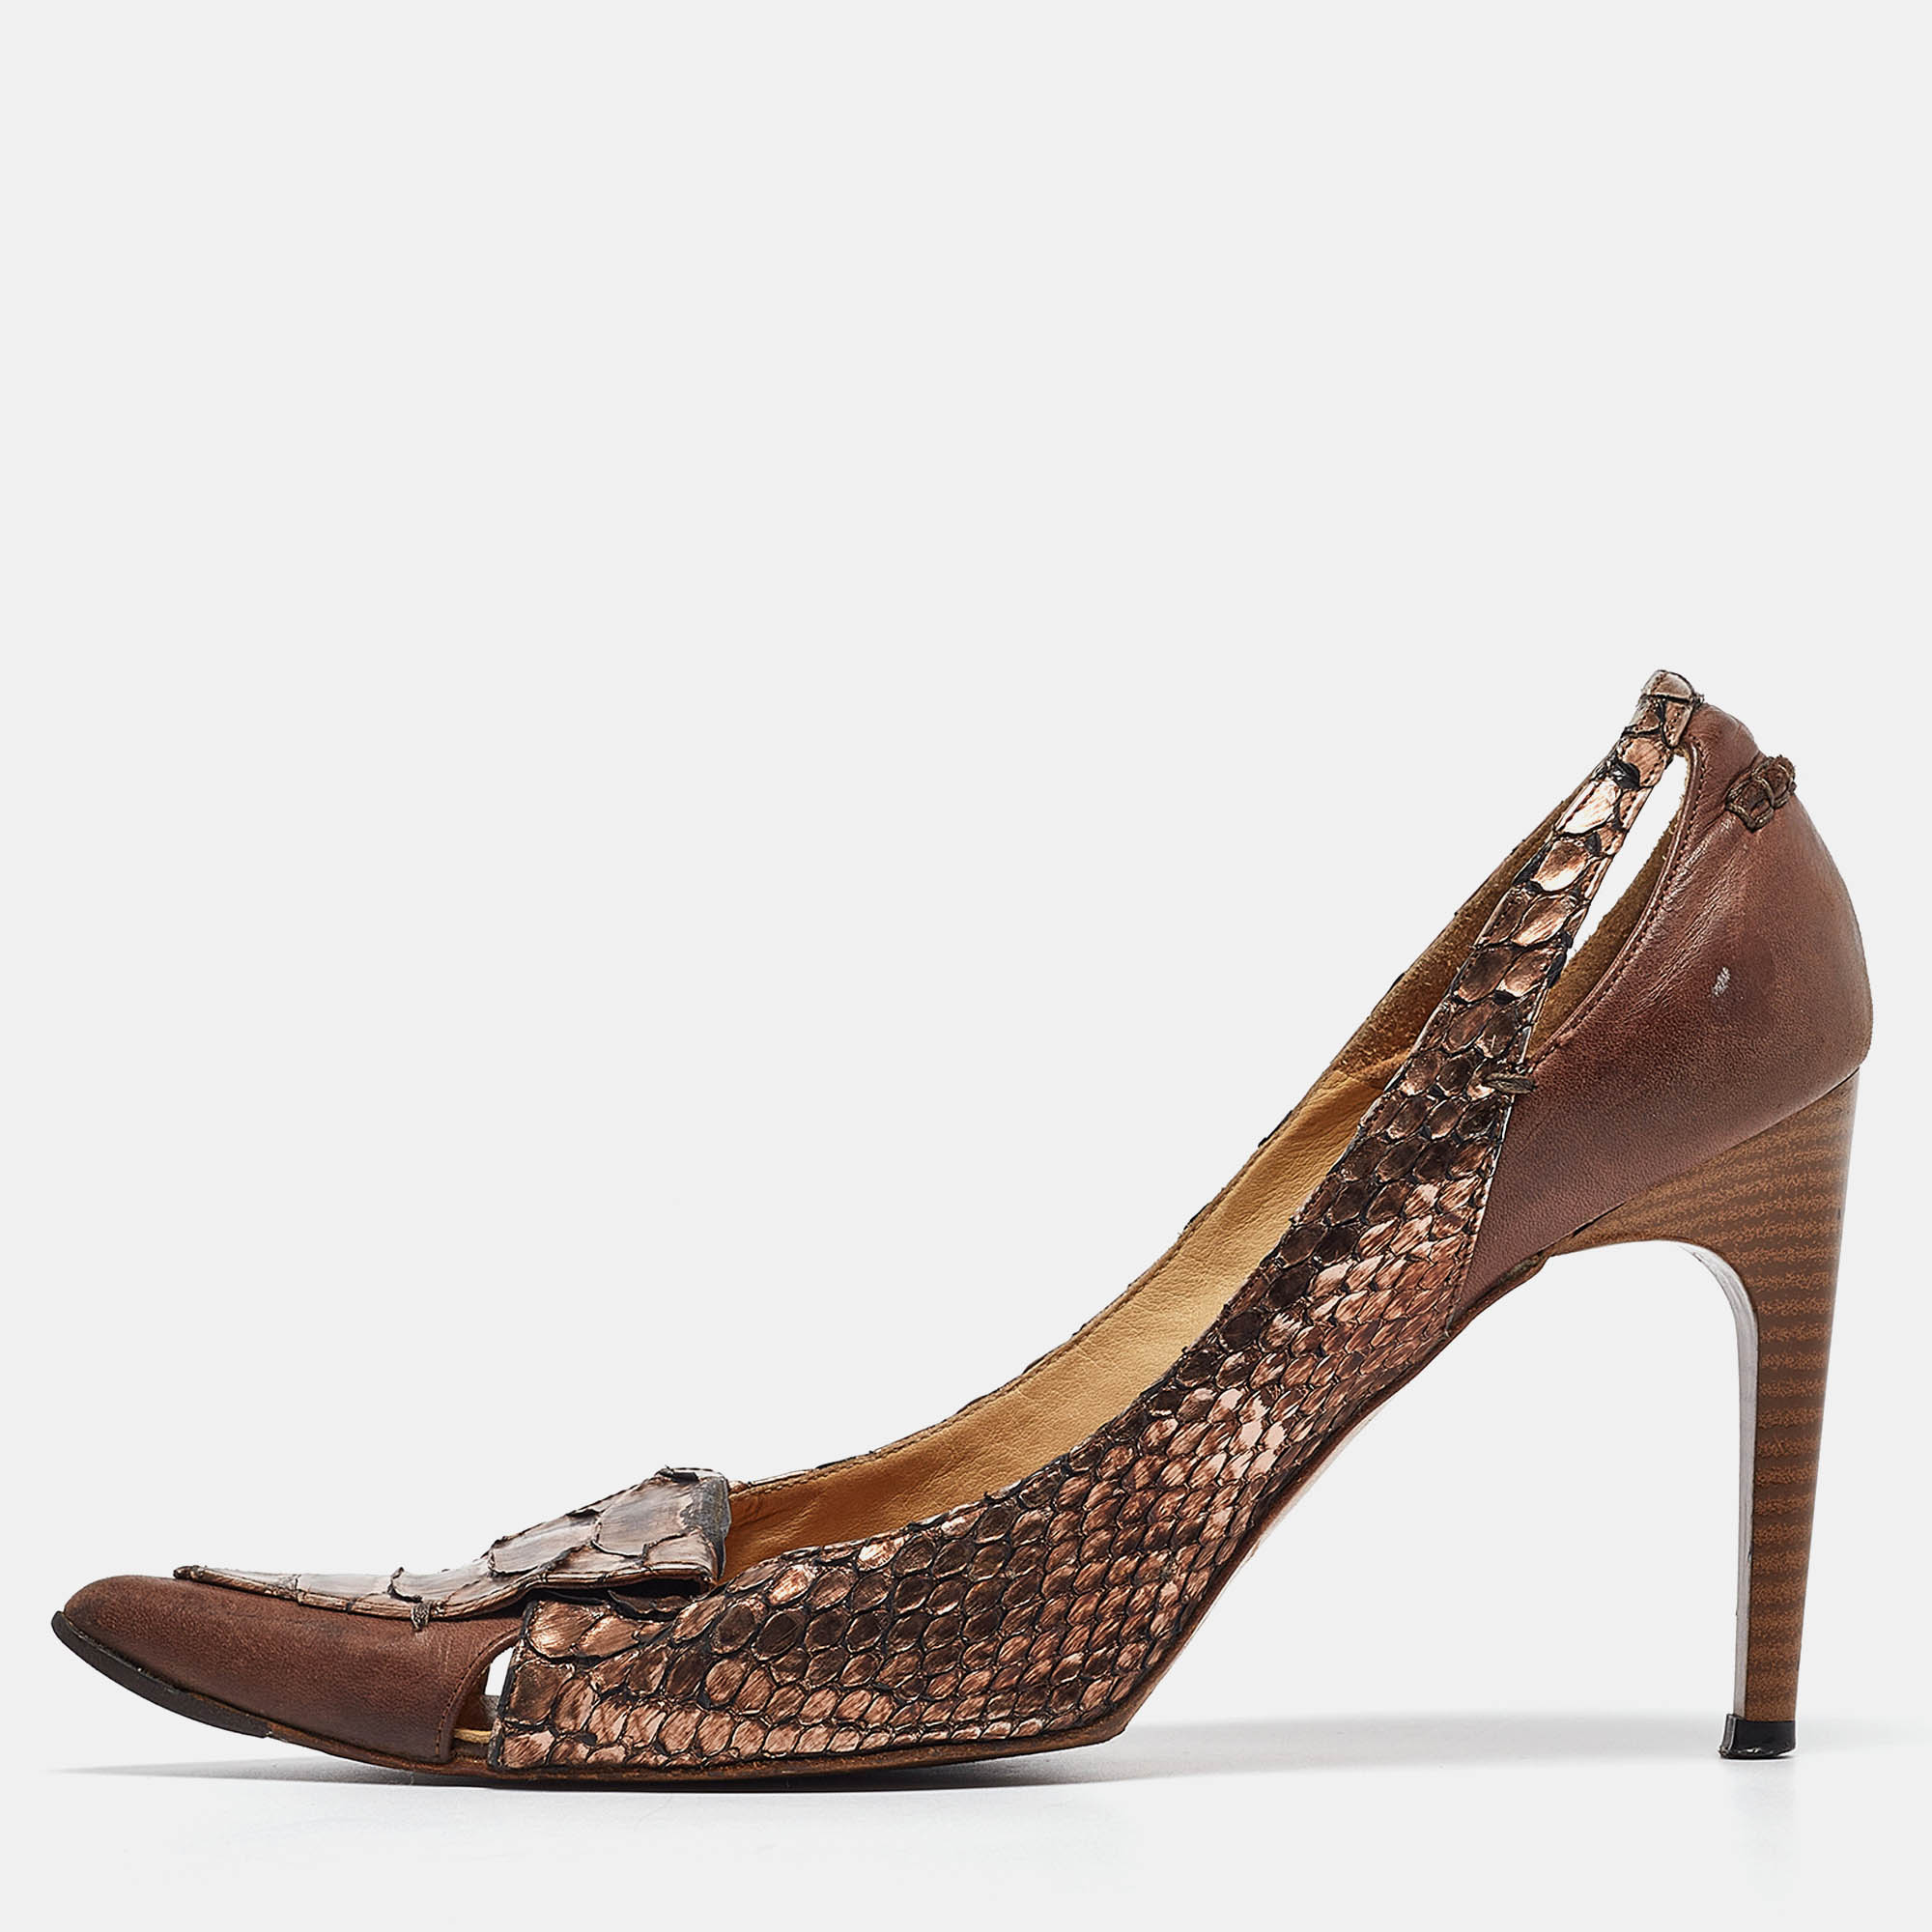 Chloe metallic python leather pointed toe pumps size 40